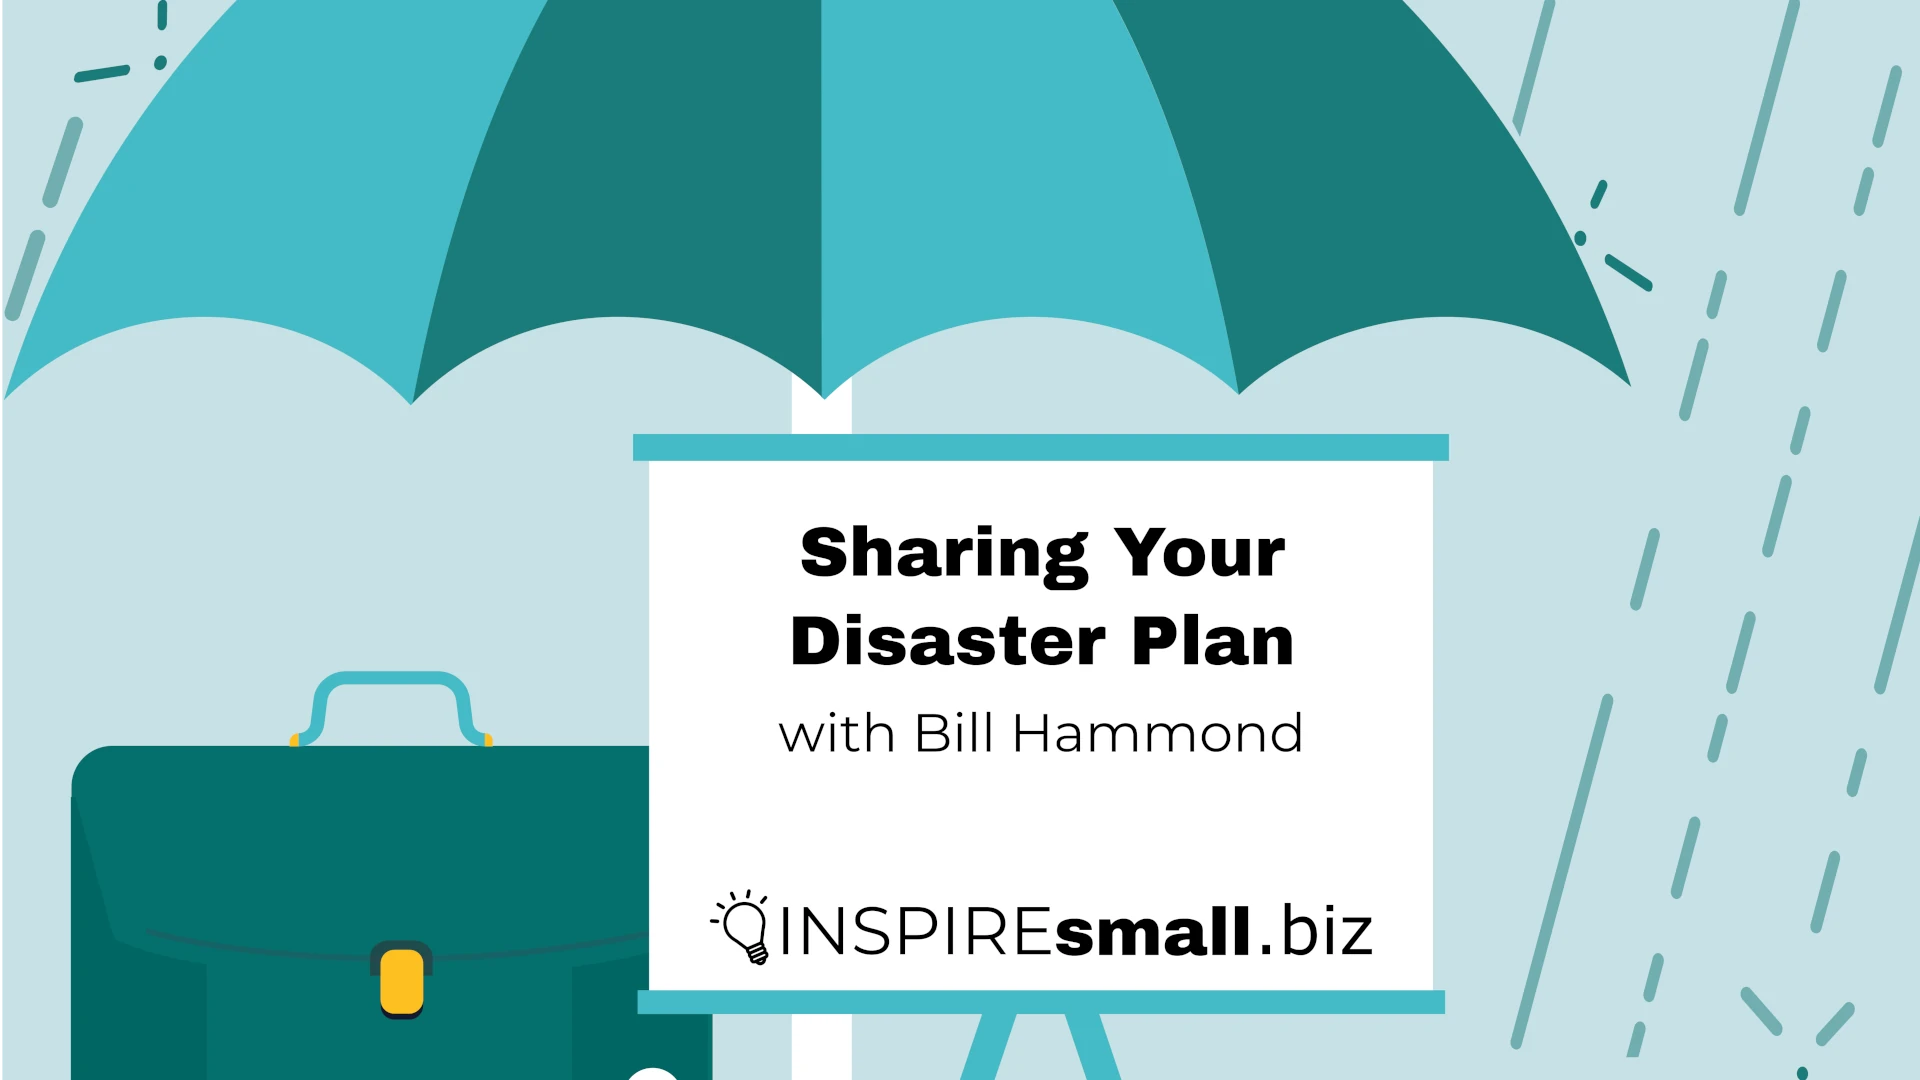 An easel next to a briefcase under an umbrella. The easel has text that reads Sharing Your Disaster Plan with Bill Hammond hosted by INSPIREsmall.biz